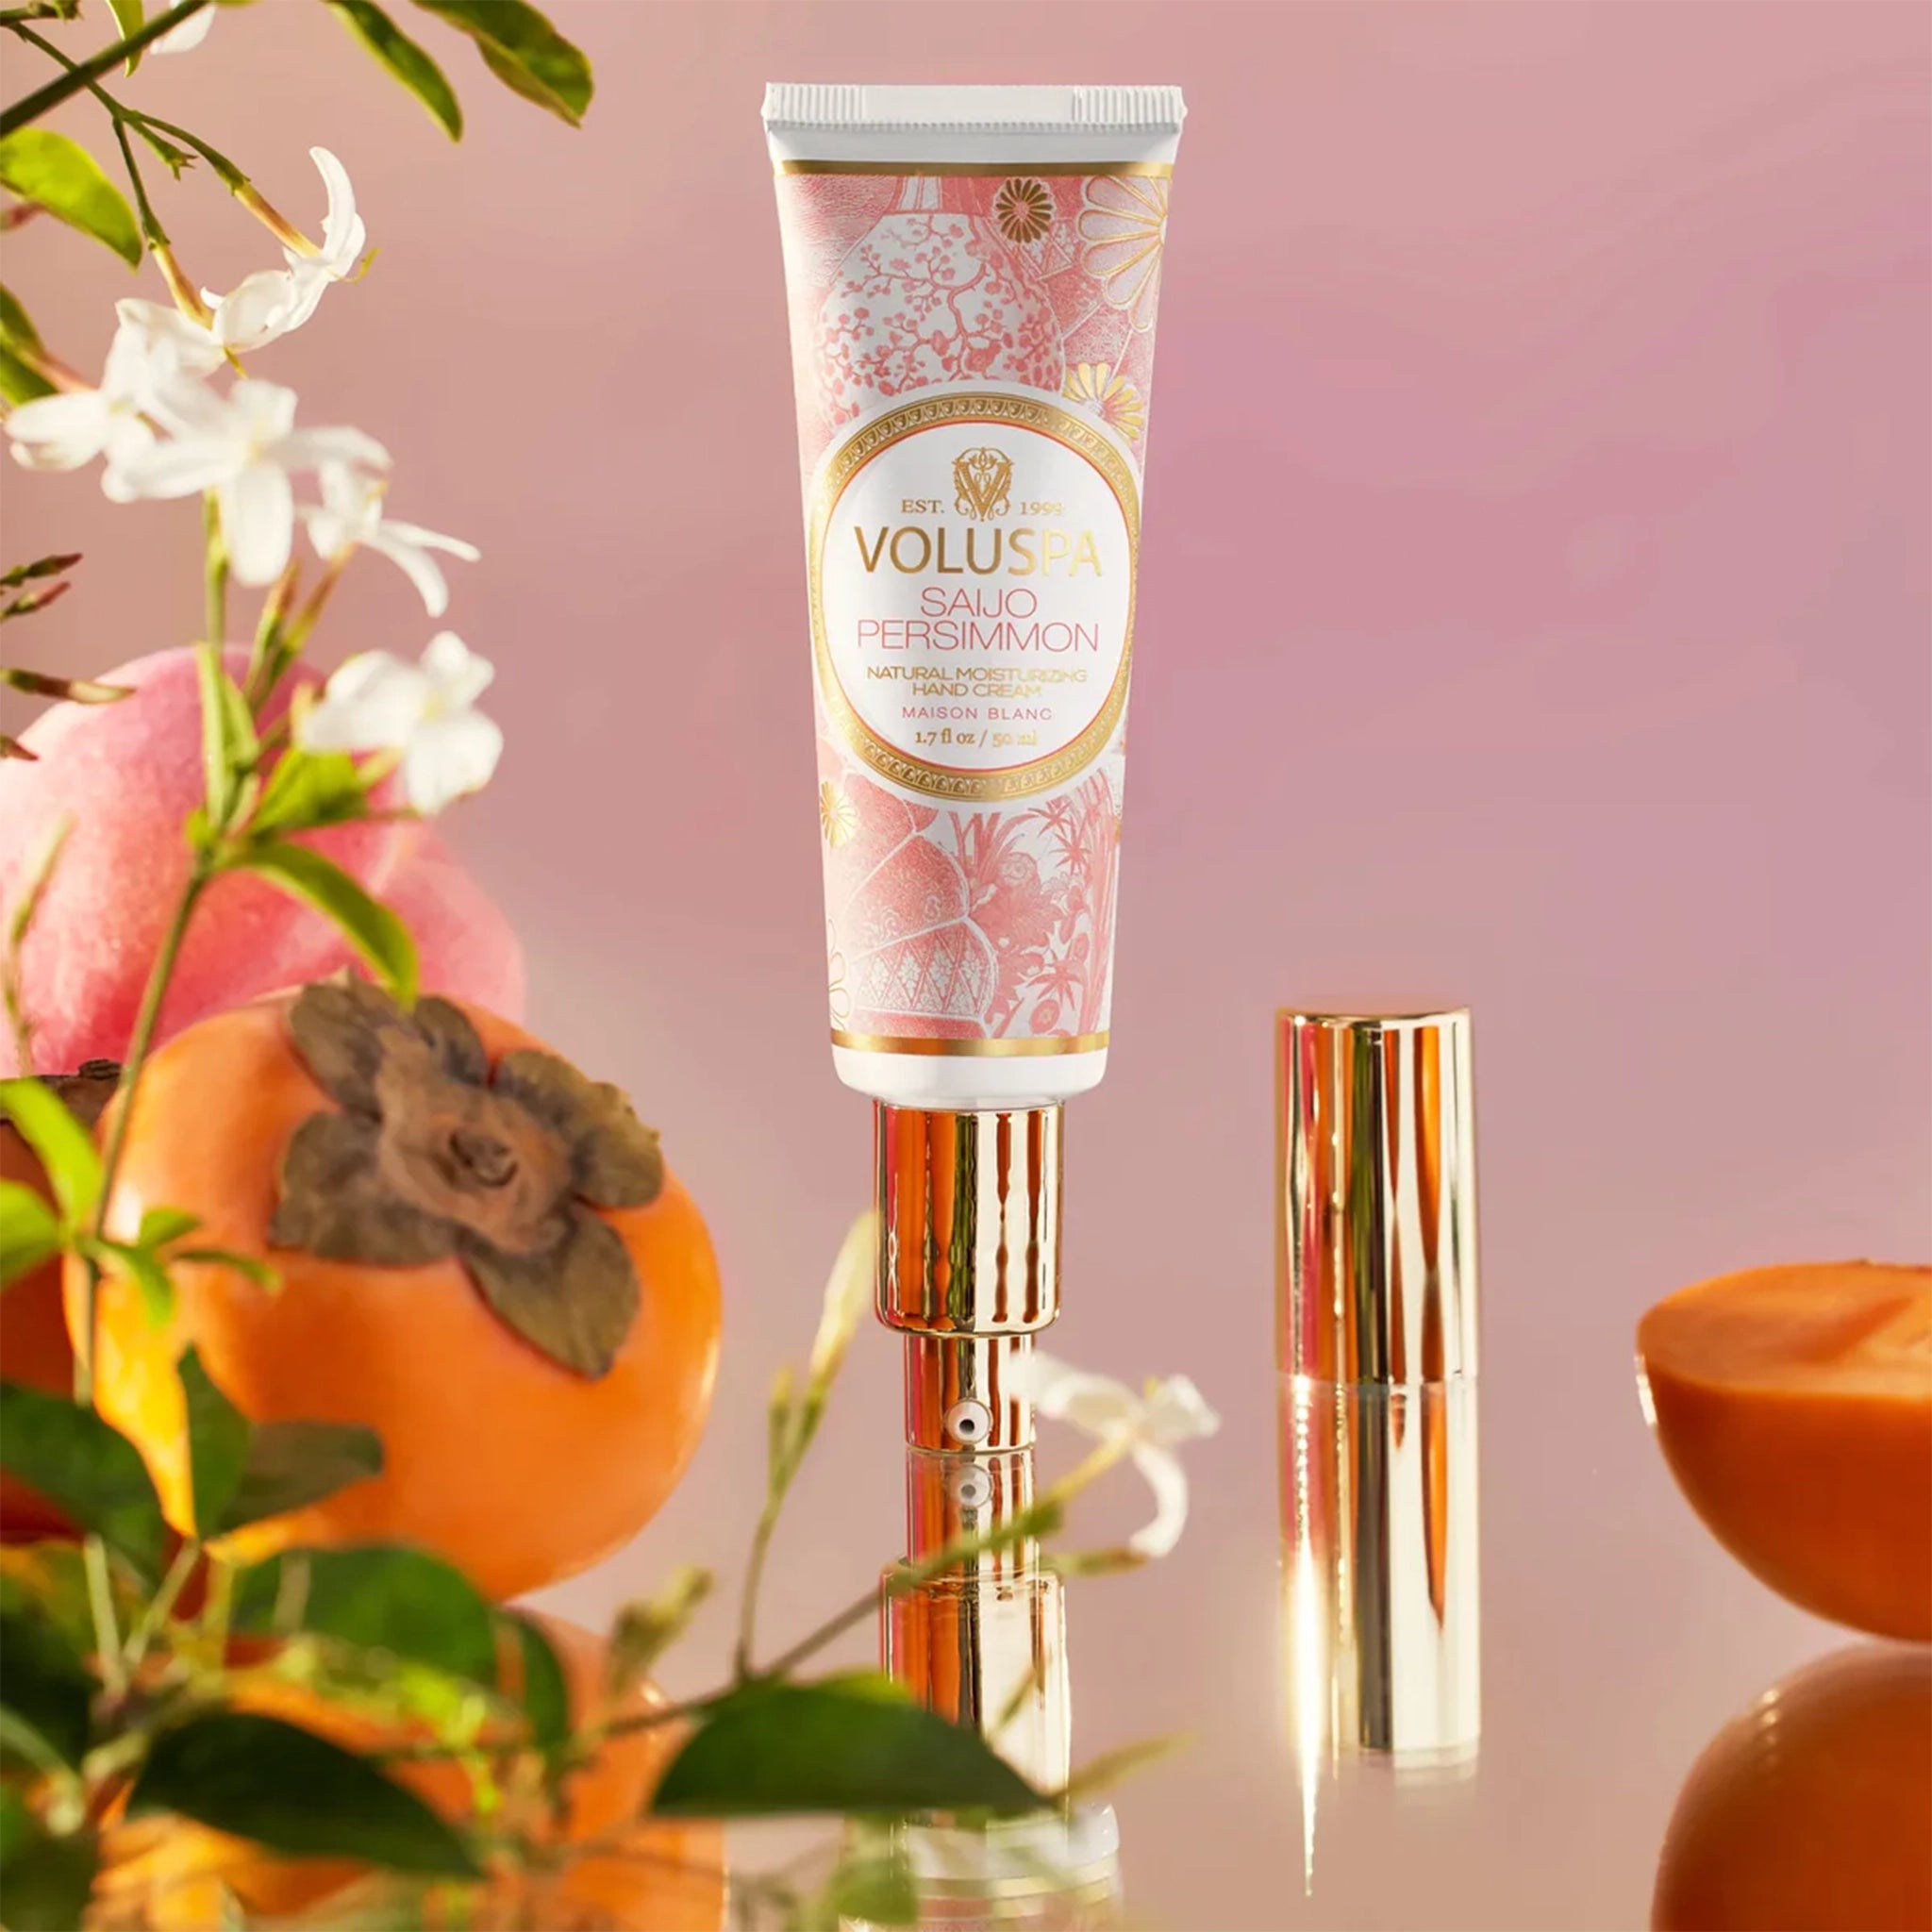 A tube of hand cream decorated with a pink floral pattern with gold text in the center that reads, &quot;Voluspa Saijo Persimmon&quot;. The tube of hand cream has a gold pump and gold cap. It is photographed around florals and persimmon fruits.